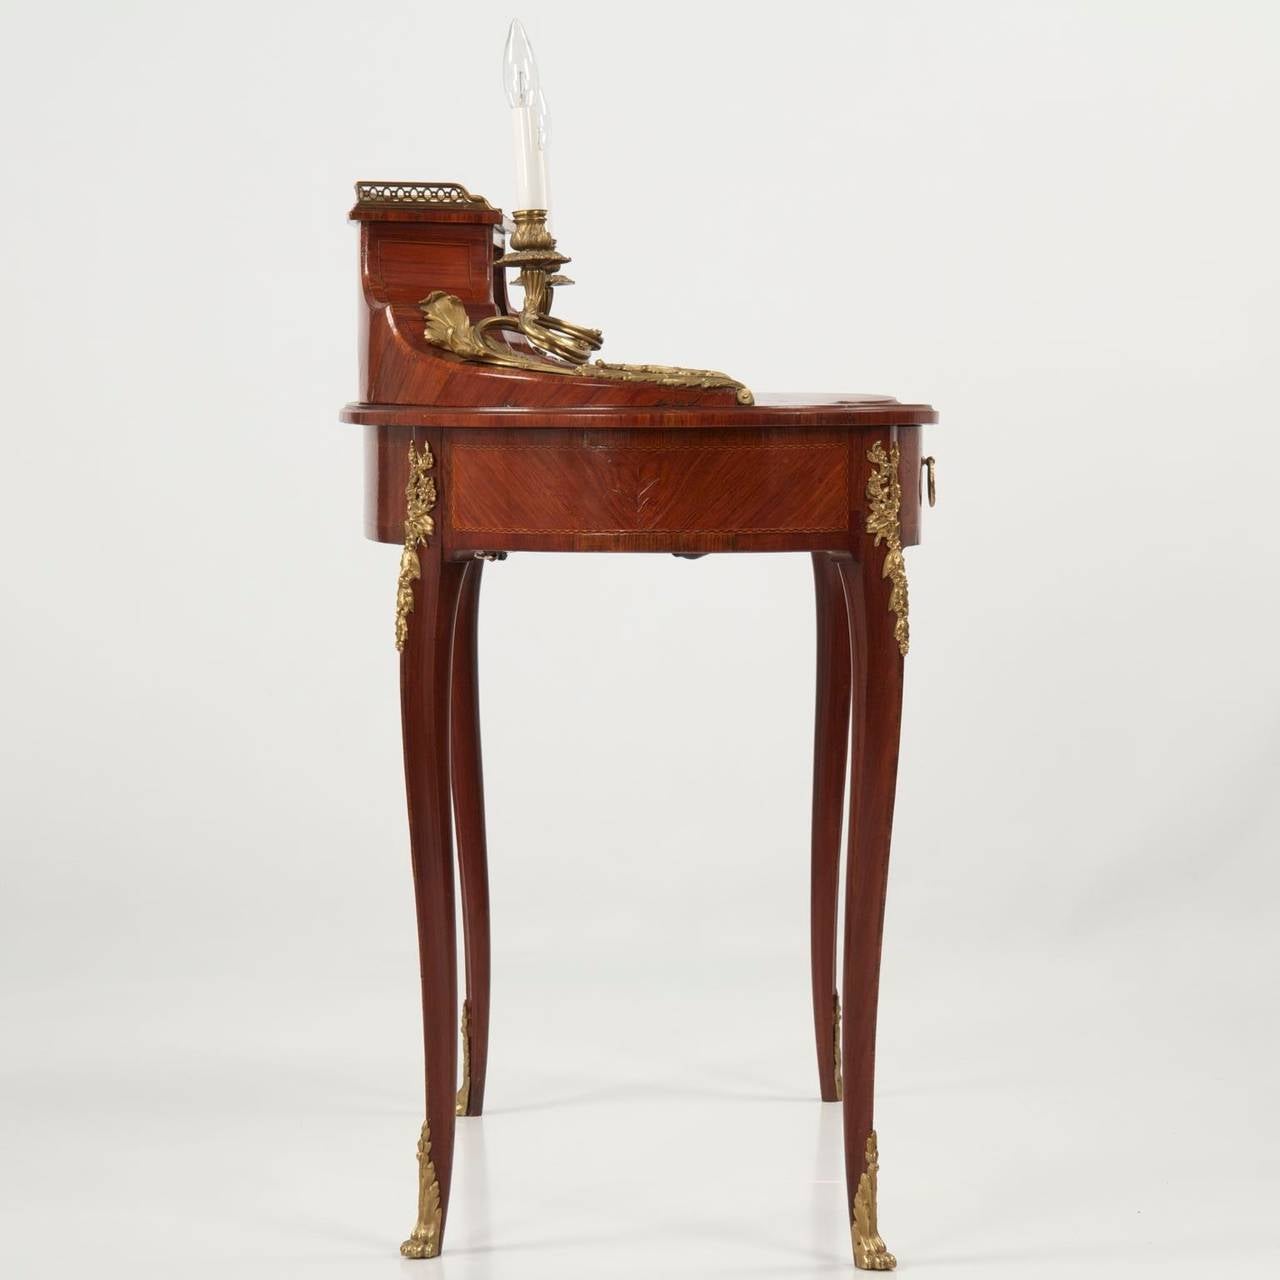 Gilt French Louis XV Style Inlaid Kidney Form Writing Desk, 19th Century